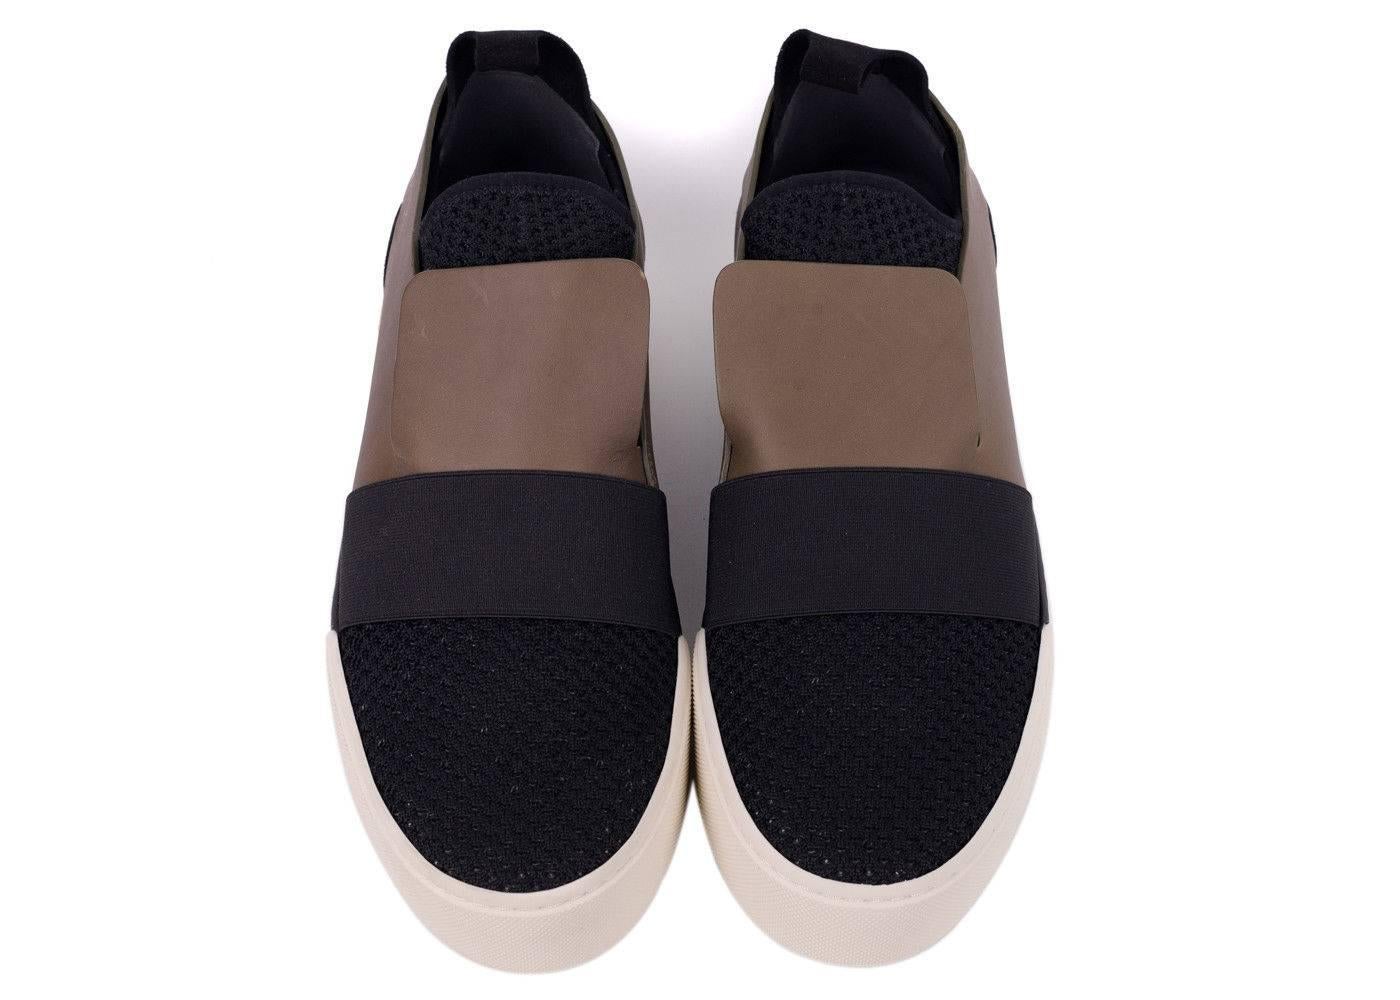 These intricately knitted mesh sneakers feature an olive leather panel and rich black elastic band. These sneakers are best when paired with jeans or elastic hemmed chinos.

100% Leather / Knitted Mesh Fabric / Suede / Elastic
Suede Heel
Leather